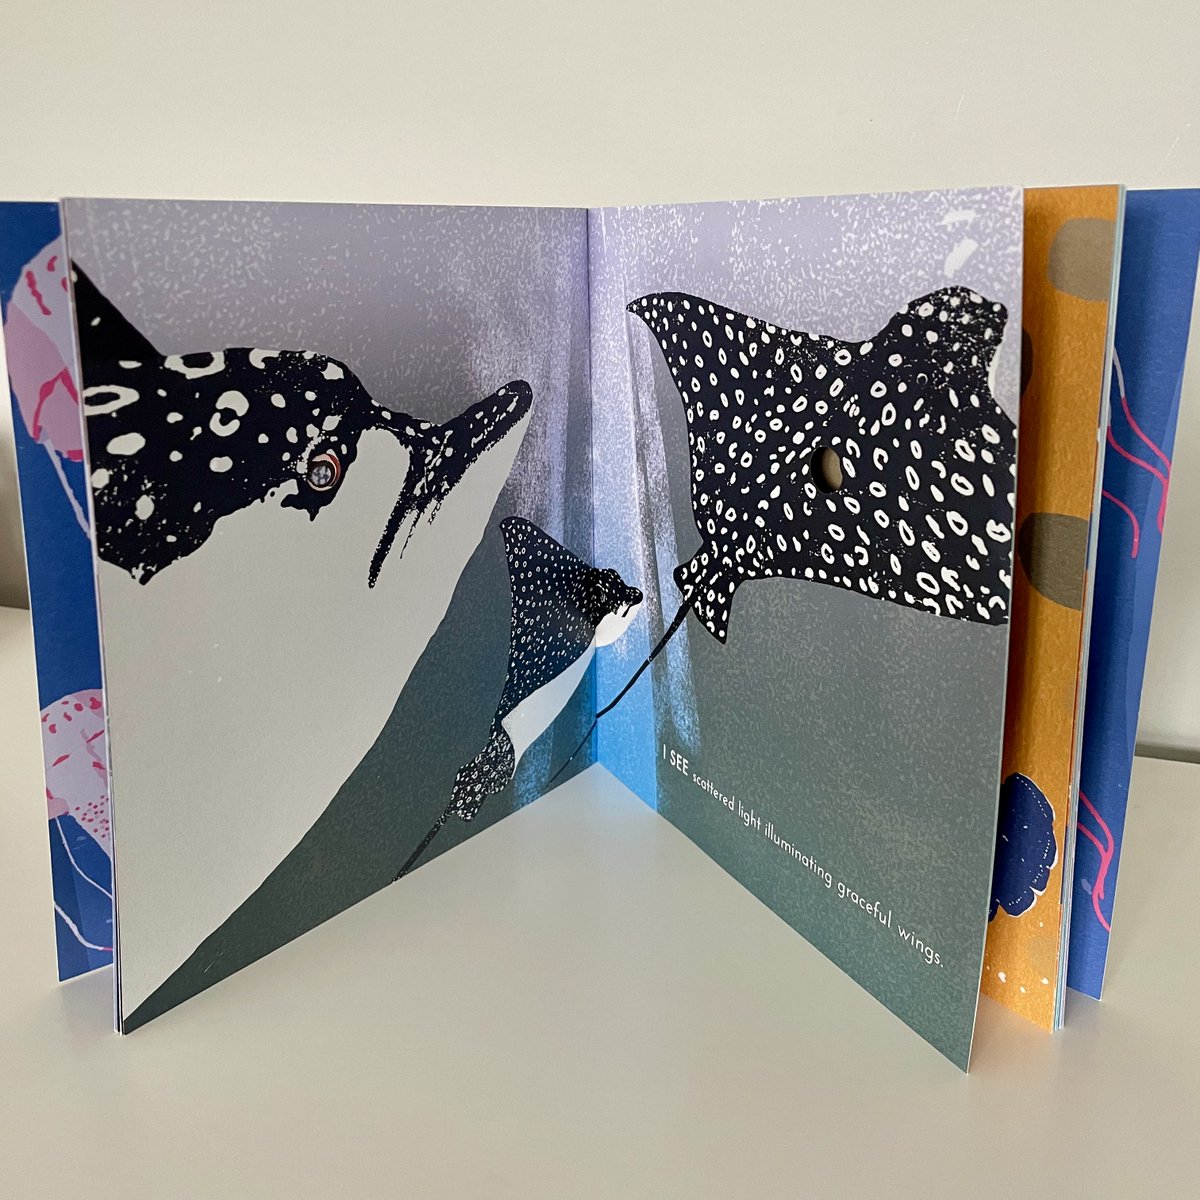 I SEE THE SEA... Breathtaking art by @julia2groves, poetic text, and information at the back with tons of facts about these fabulous creatures and how we can protect them and their waters. Bold in every way. #TeachingResources childs-play.com/products/97817… #WaterAction #WorldWaterDay